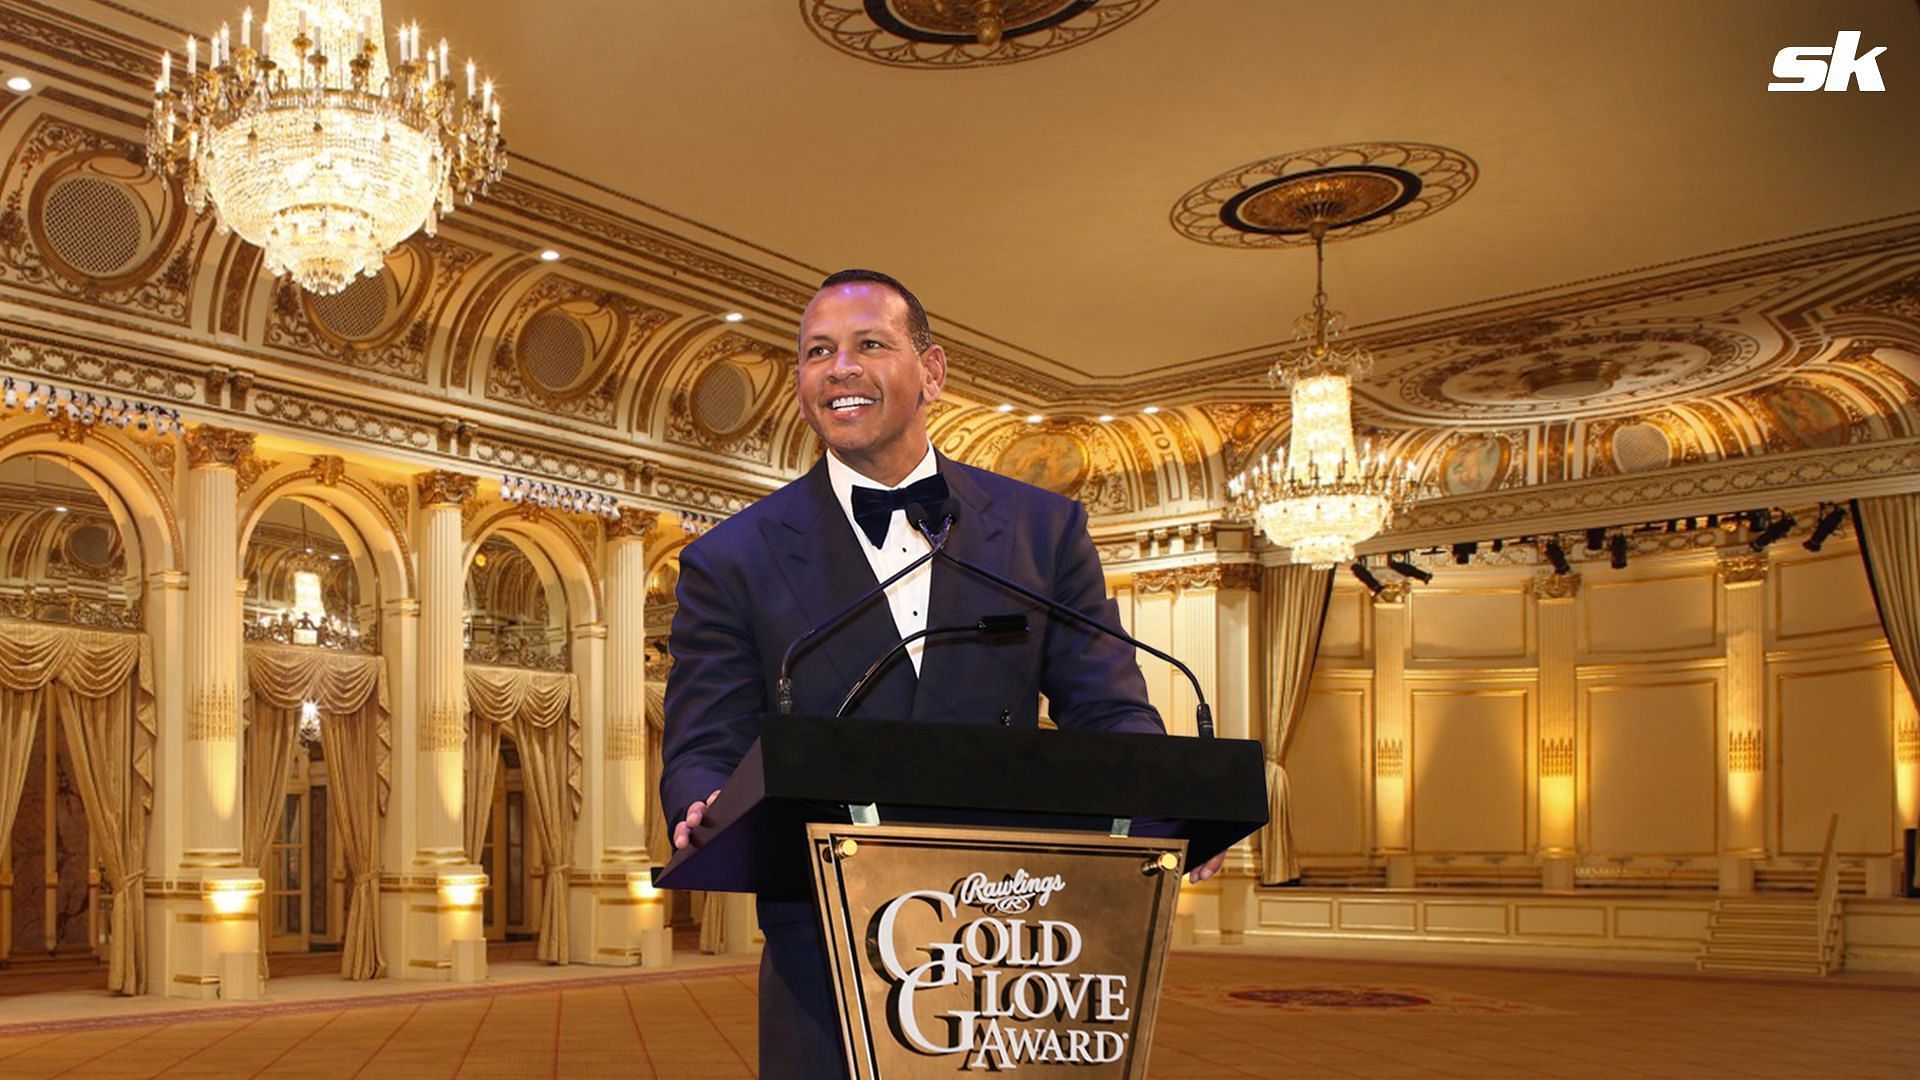 Alex Rodriguez is a legendary Yankees player